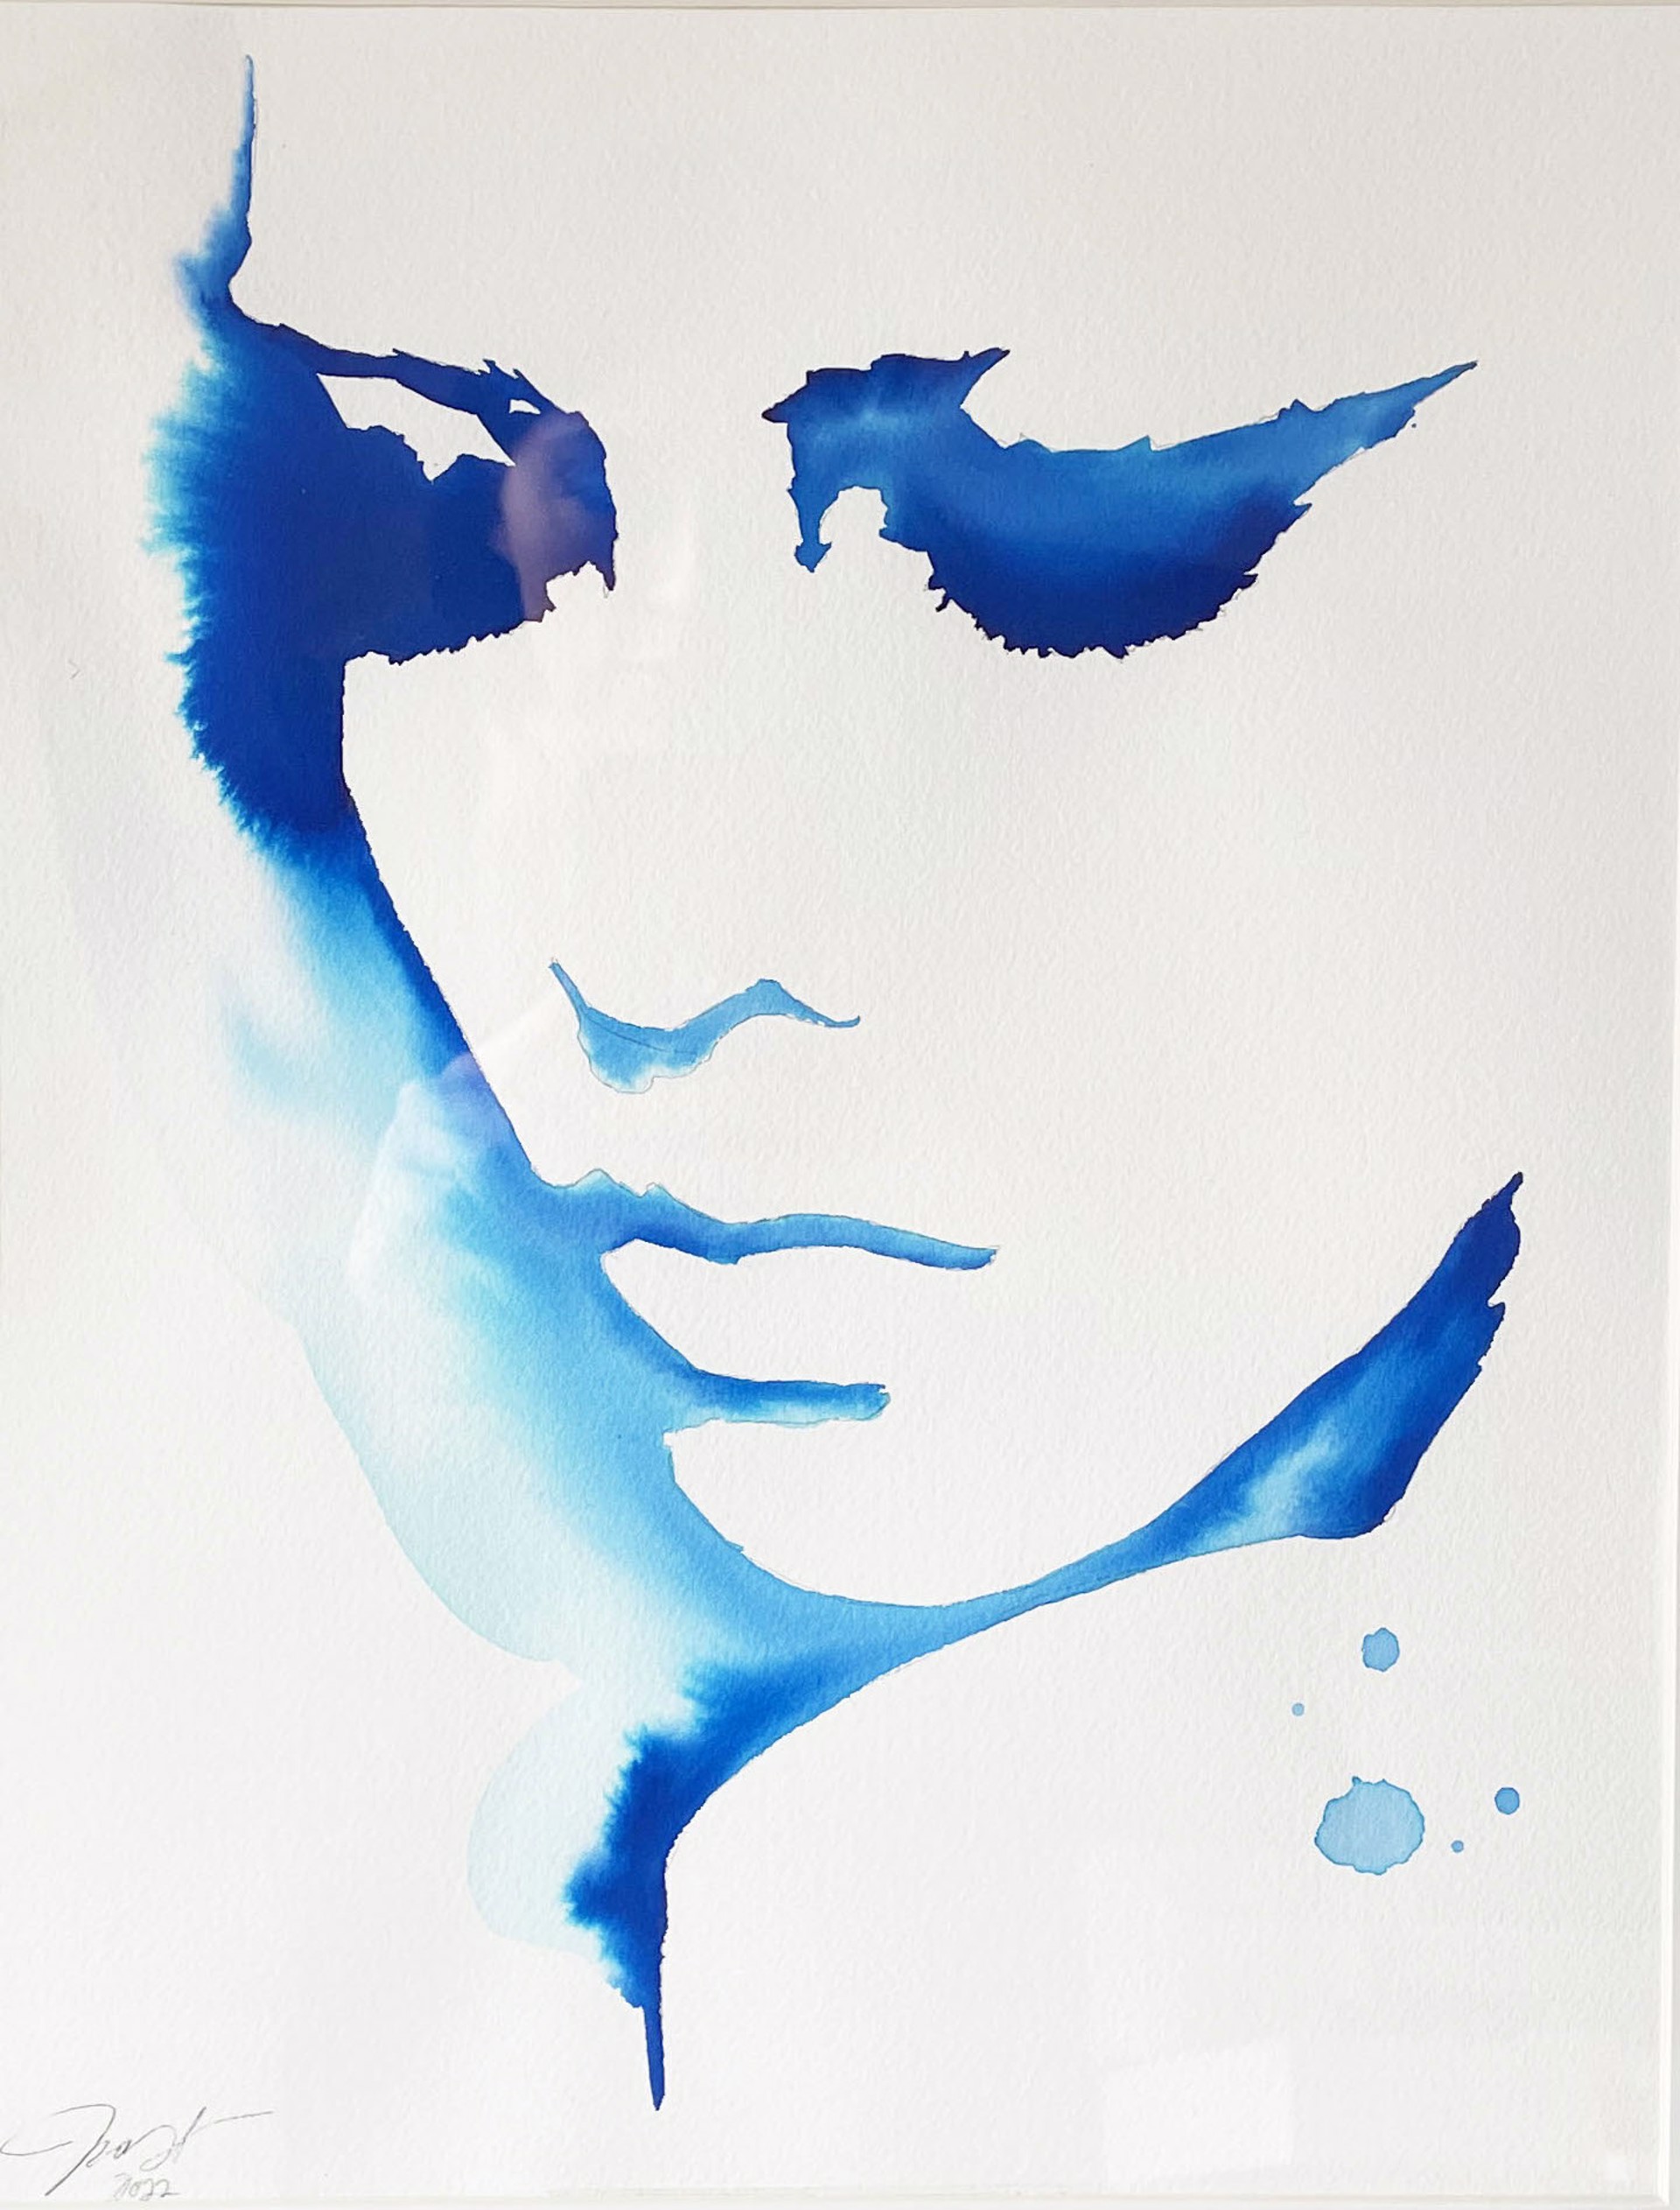 Deep in Blue by Jessica Durrant